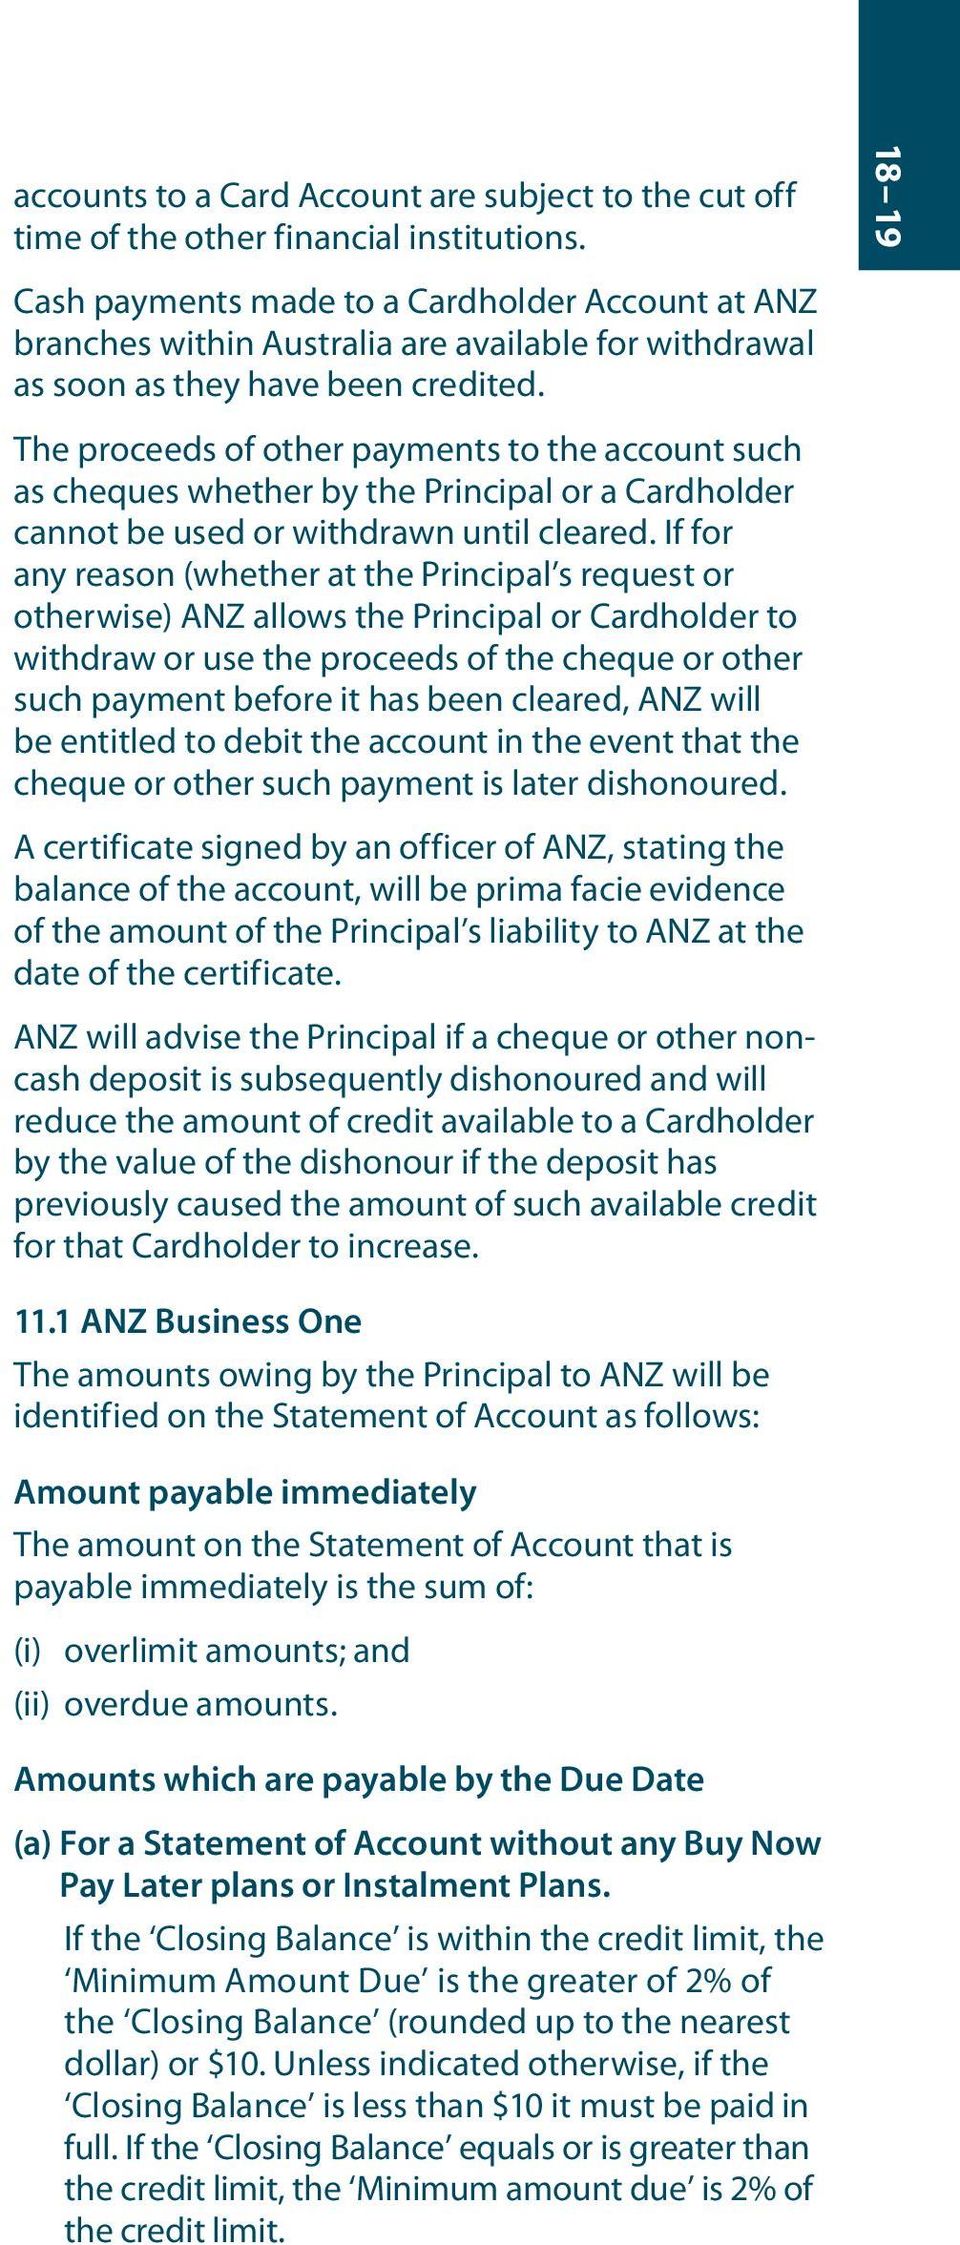 The proceeds of other payments to the account such as cheques whether by the Principal or a Cardholder cannot be used or withdrawn until cleared.